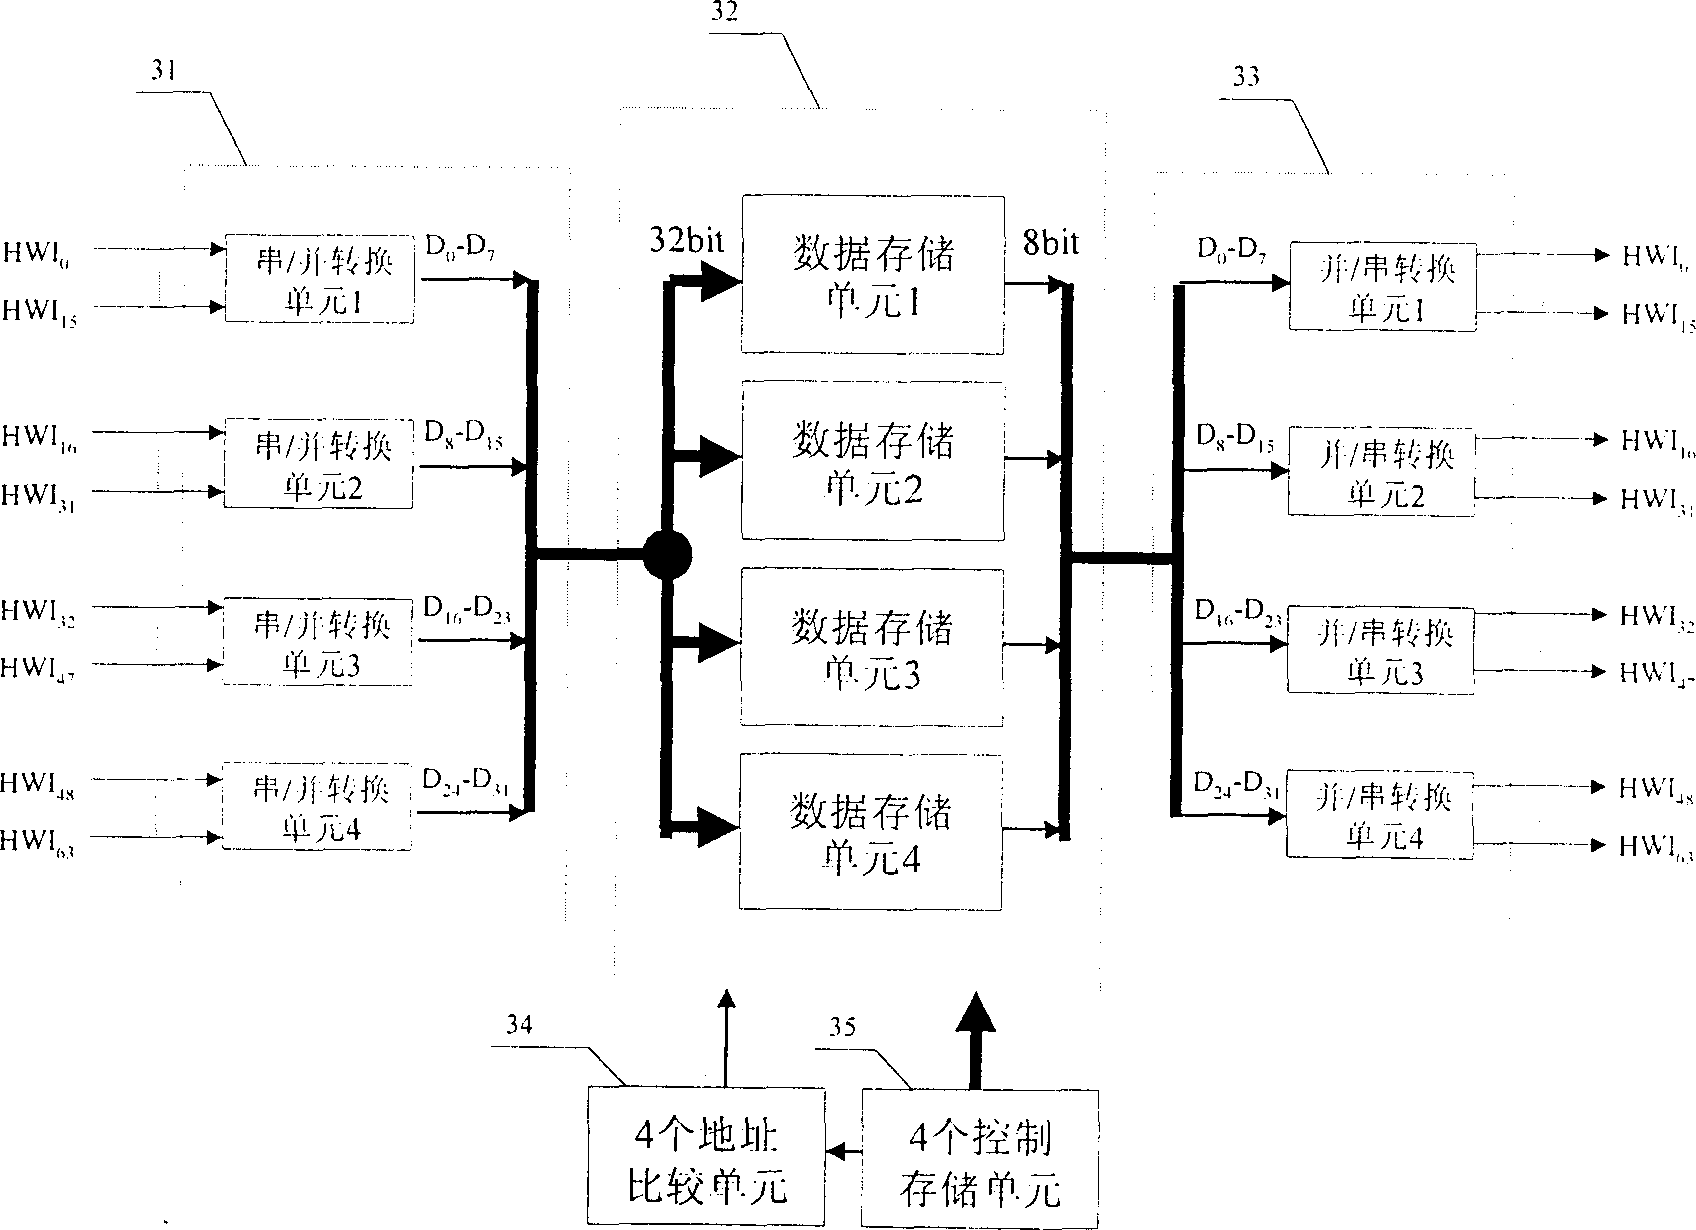 Single chip large capacity digital time division switching network